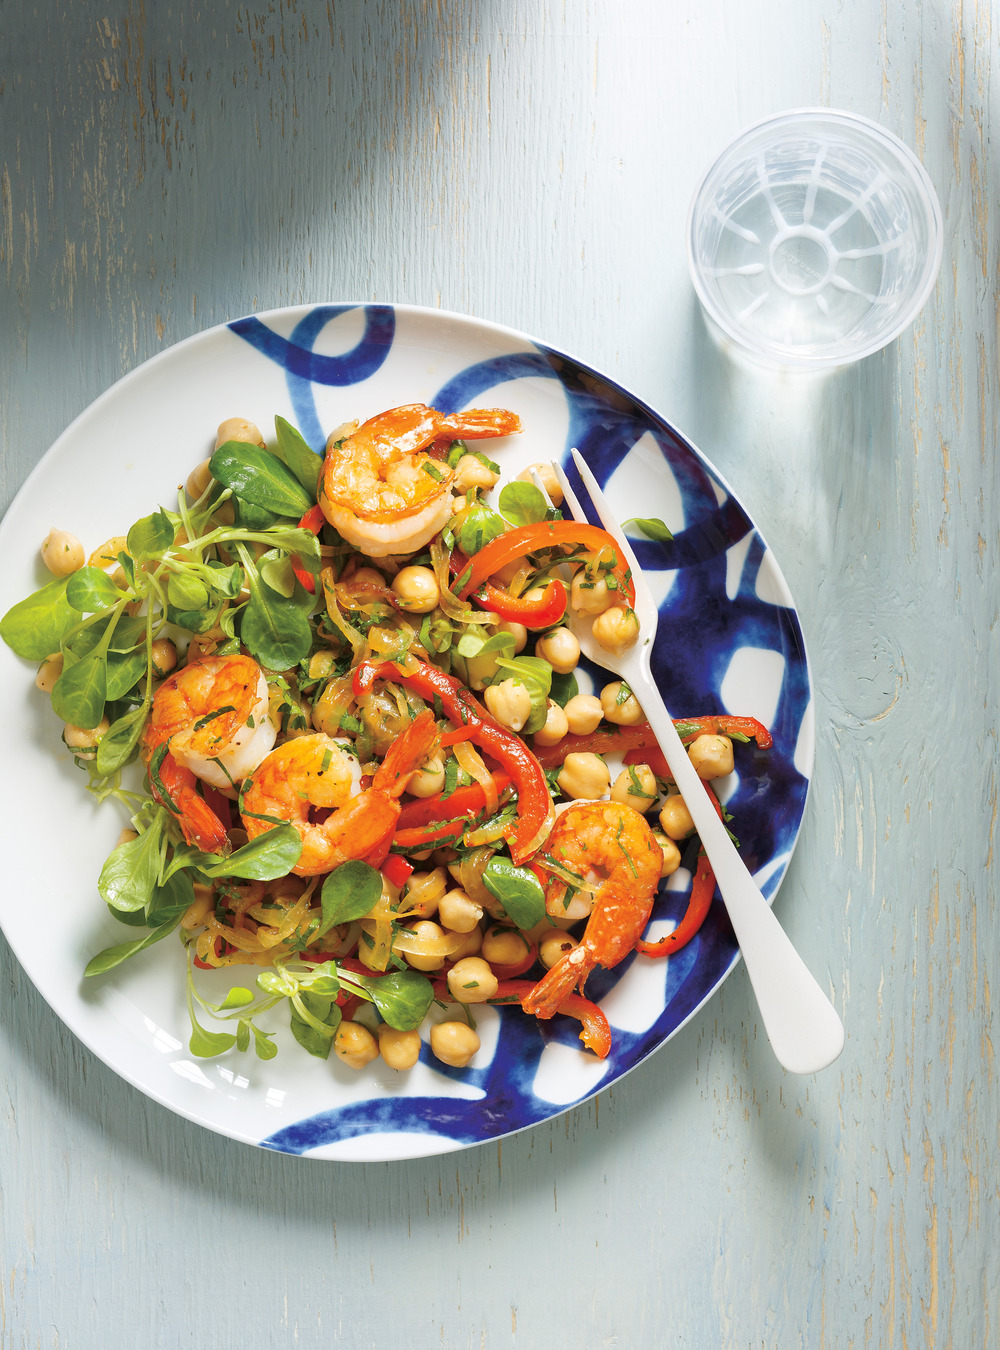 Chickpea, Shrimp, Bell Pepper and Parsley Salad